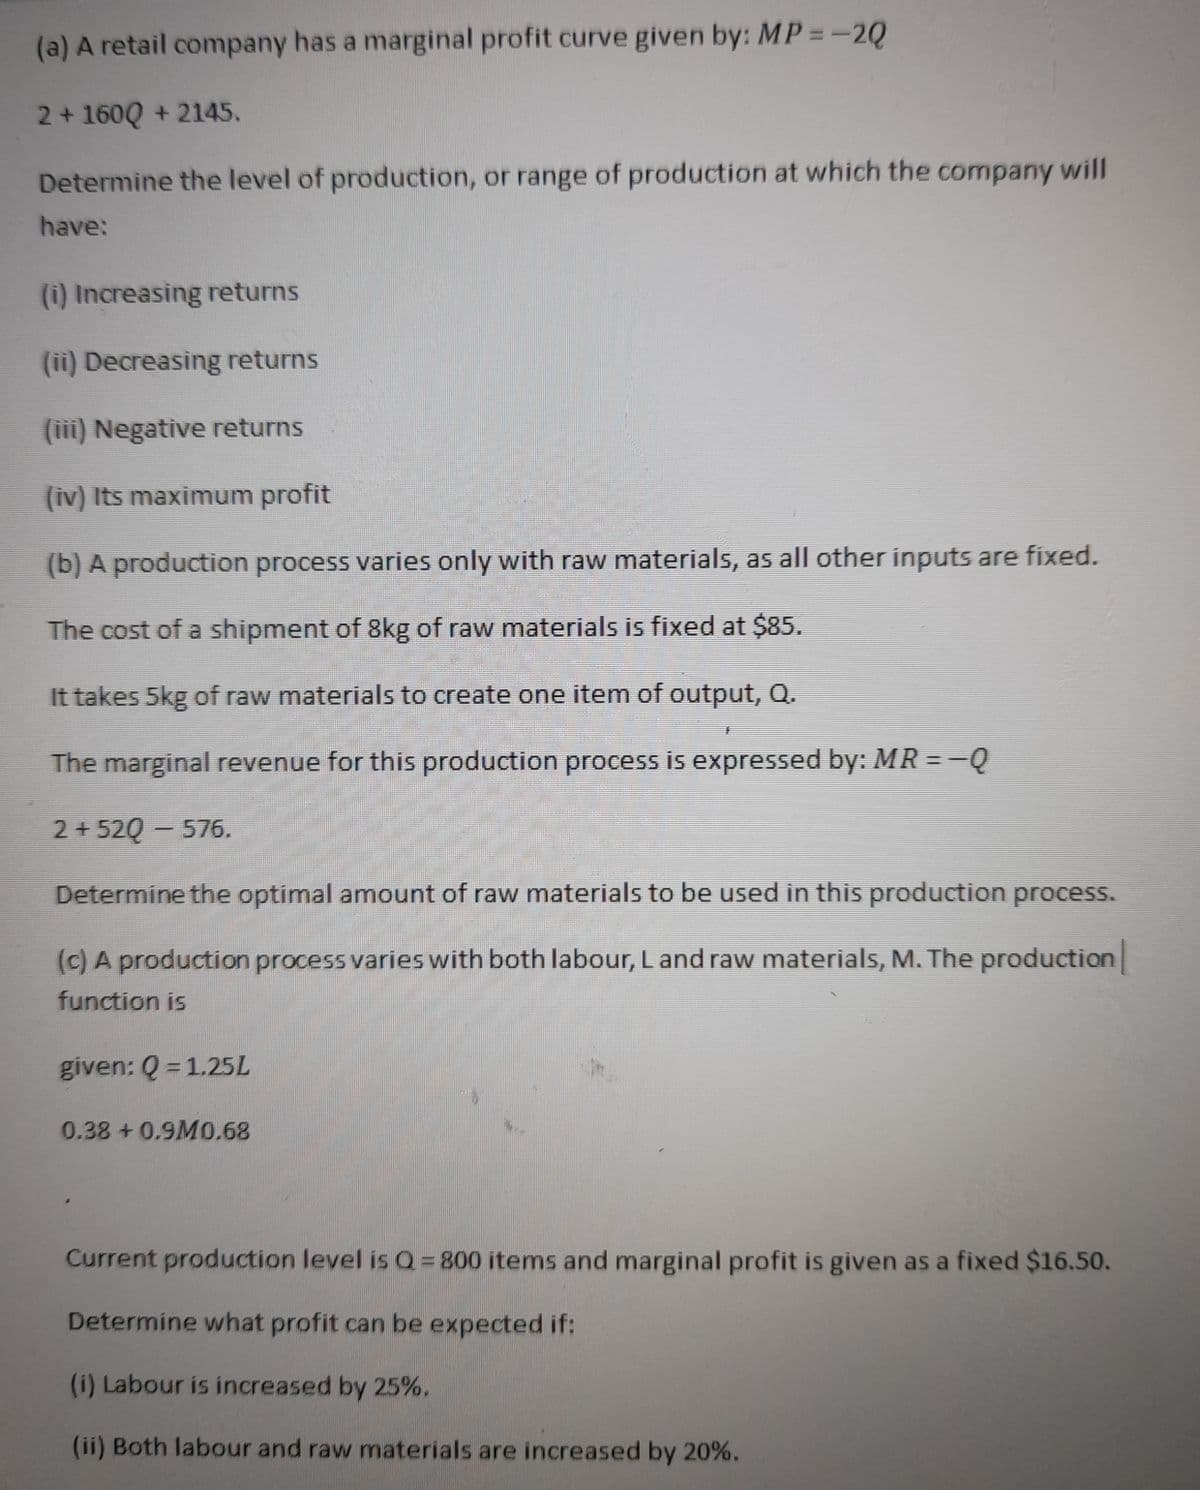 (a) A retail company has a marginal profit curve given by: MP =-2Q
2+ 160Q + 2145.
Determine the level of production, or range of production at which the company will
have:
(i) Increasing returns
(ii) Decreasing returns
(iii) Negative returns
(iv) Its maximum profit
(b) A production process varies only with raw materials, as all other inputs are fixed.
The cost of a shipment of 8kg of raw materials is fixed at $85.
It takes 5kg of raw materials to create one item of output, Q.
The marginal revenue for this production process is expressed by: MR = =Q
2 + 520 – 576.
2+52Q
Determine the optimal amount of raw materials to be used in this production process.
(c) A production process varies with both labour, L and raw materials, M. The production
function is
given: Q = 1.25L
0.38 +0.9M0.68
Current production level is Q= 800 items and marginal profit is given as a fixed $16.50.
Determine what profit can be expected if:
(i) Labour is increased by 25%.
(ii) Both labour and raw materials are increased by 20%.
